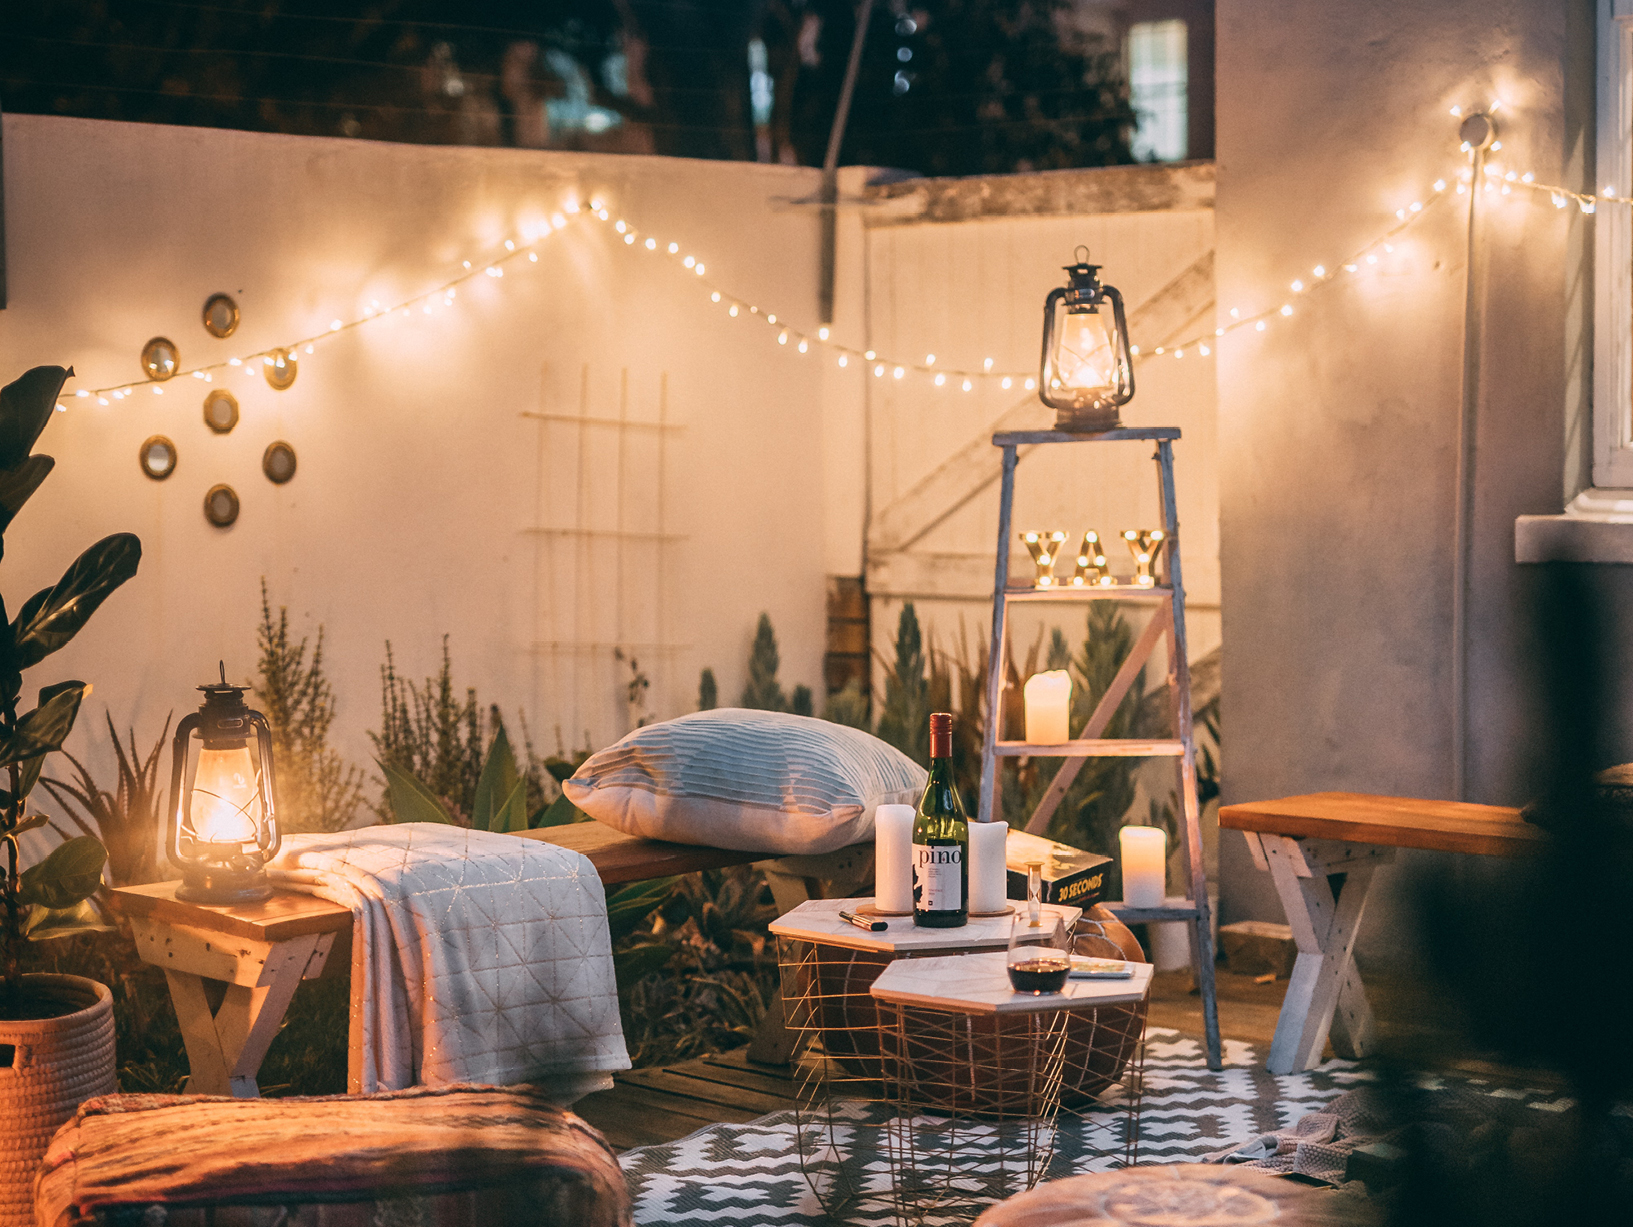 decorated backyard with furniture and lights